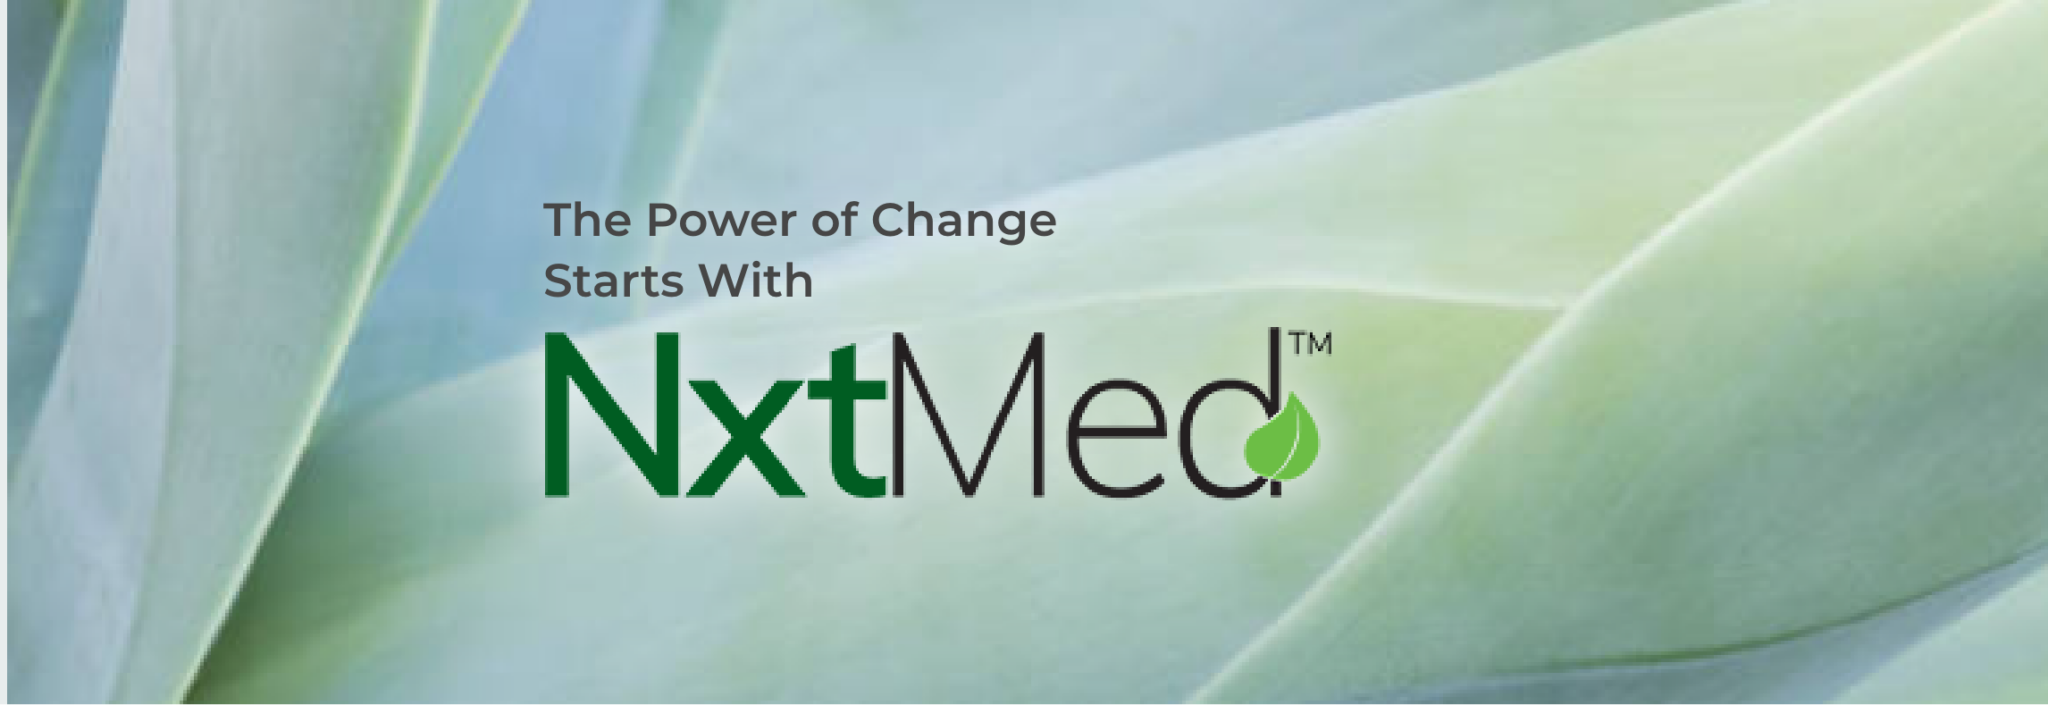 The power of change starts with NxtMed